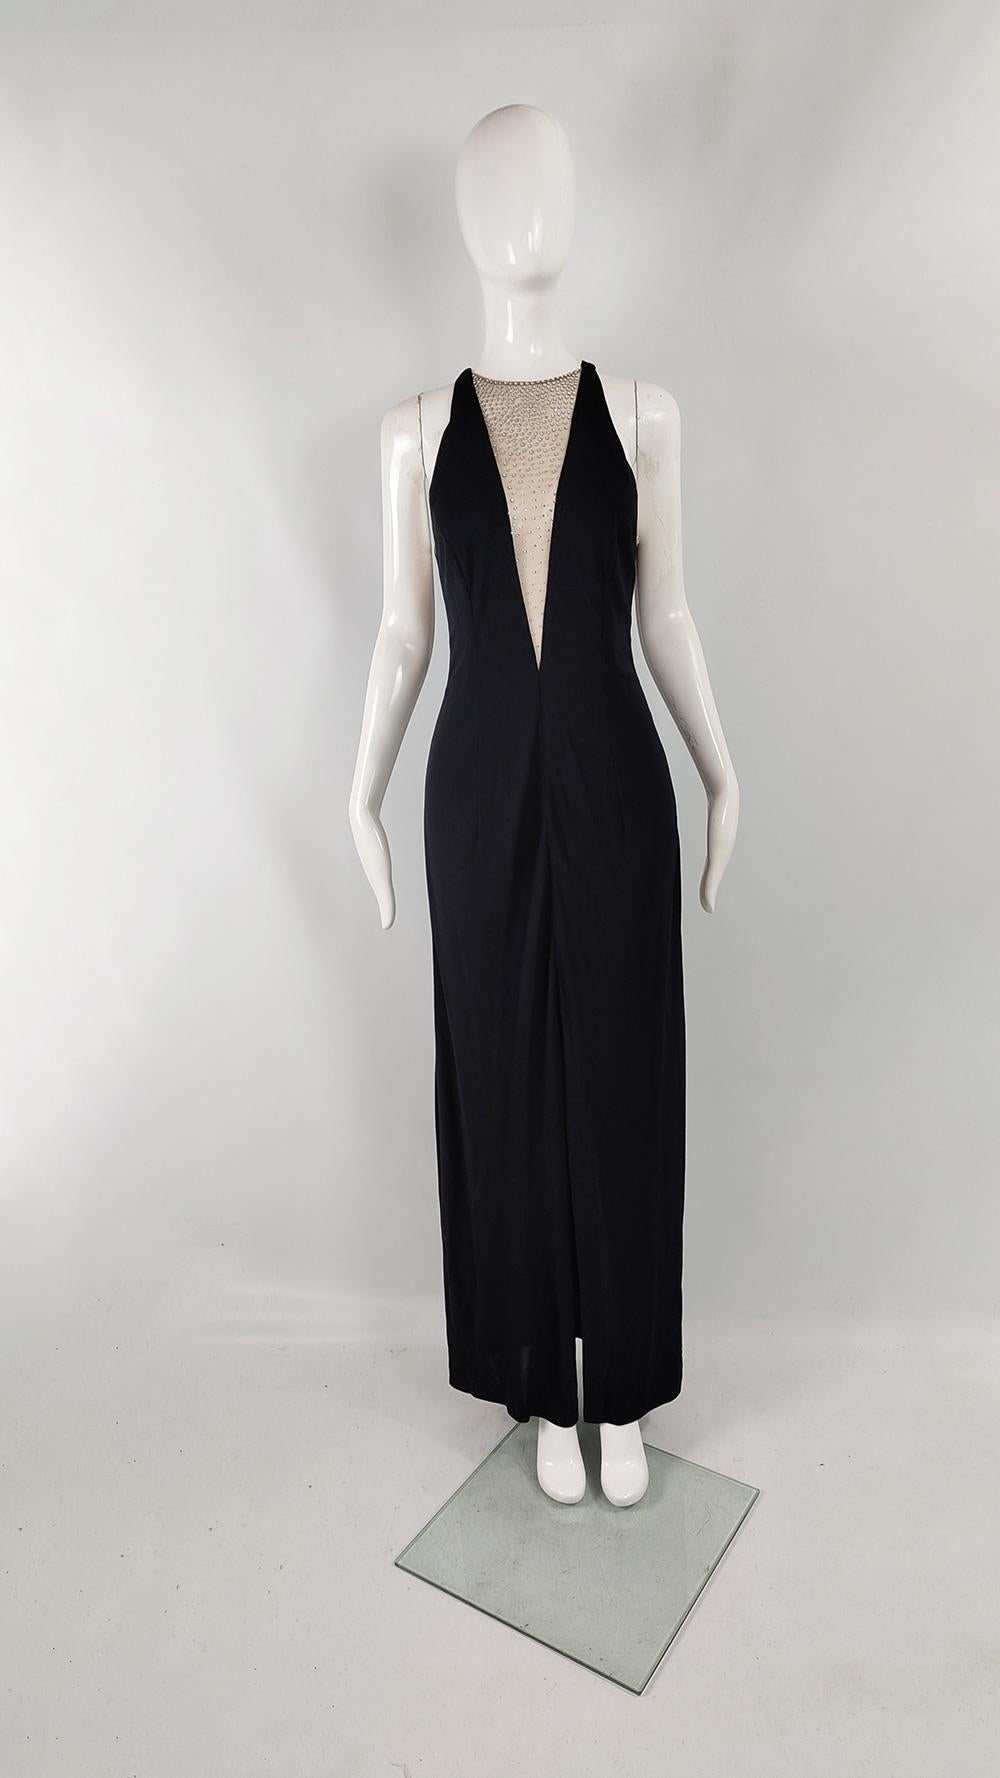 A breathtakingly sexy vintage womens evening gown from the late 80s / early 90s by luxury Monaco-based fashion house, Jiki of Monte Carlo. In a black jersey with scandalous, racy cut outs in a nude tulle creating a plunging back, sides and neckline.